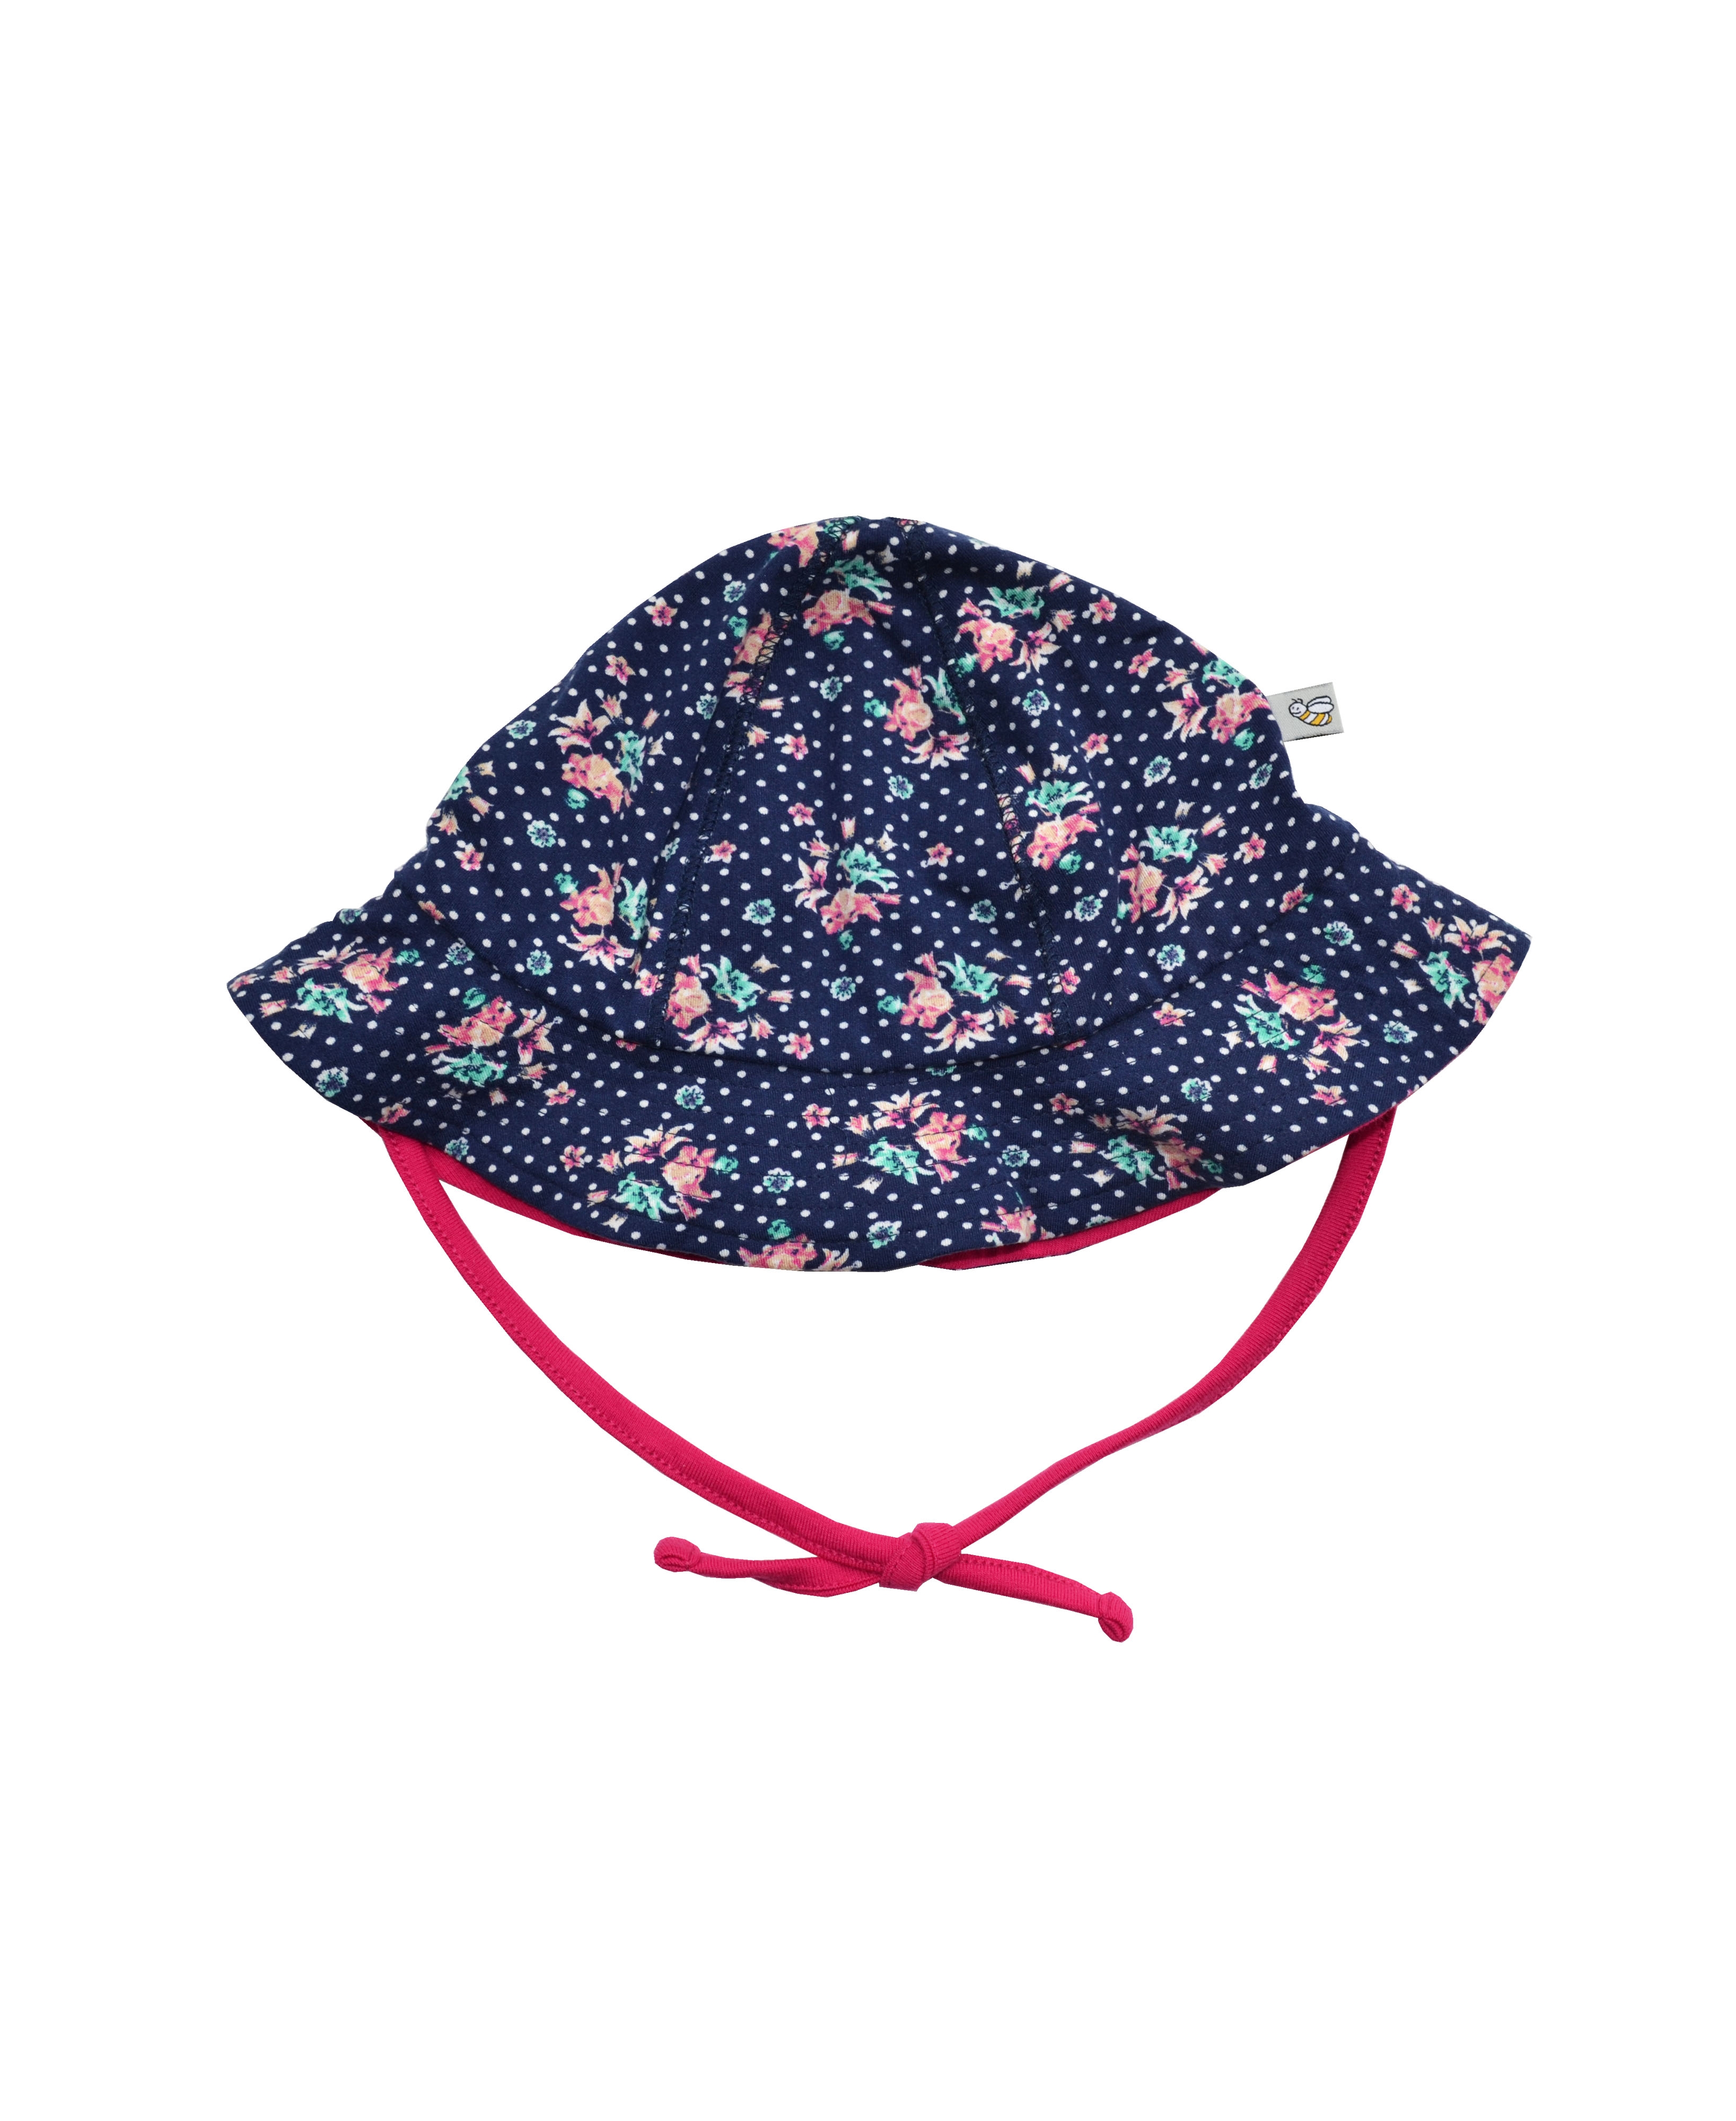 Babeez | Allover Flower Print On Pink / Navy Reversible Hat (95% Cotton 5% Elasthan) undefined